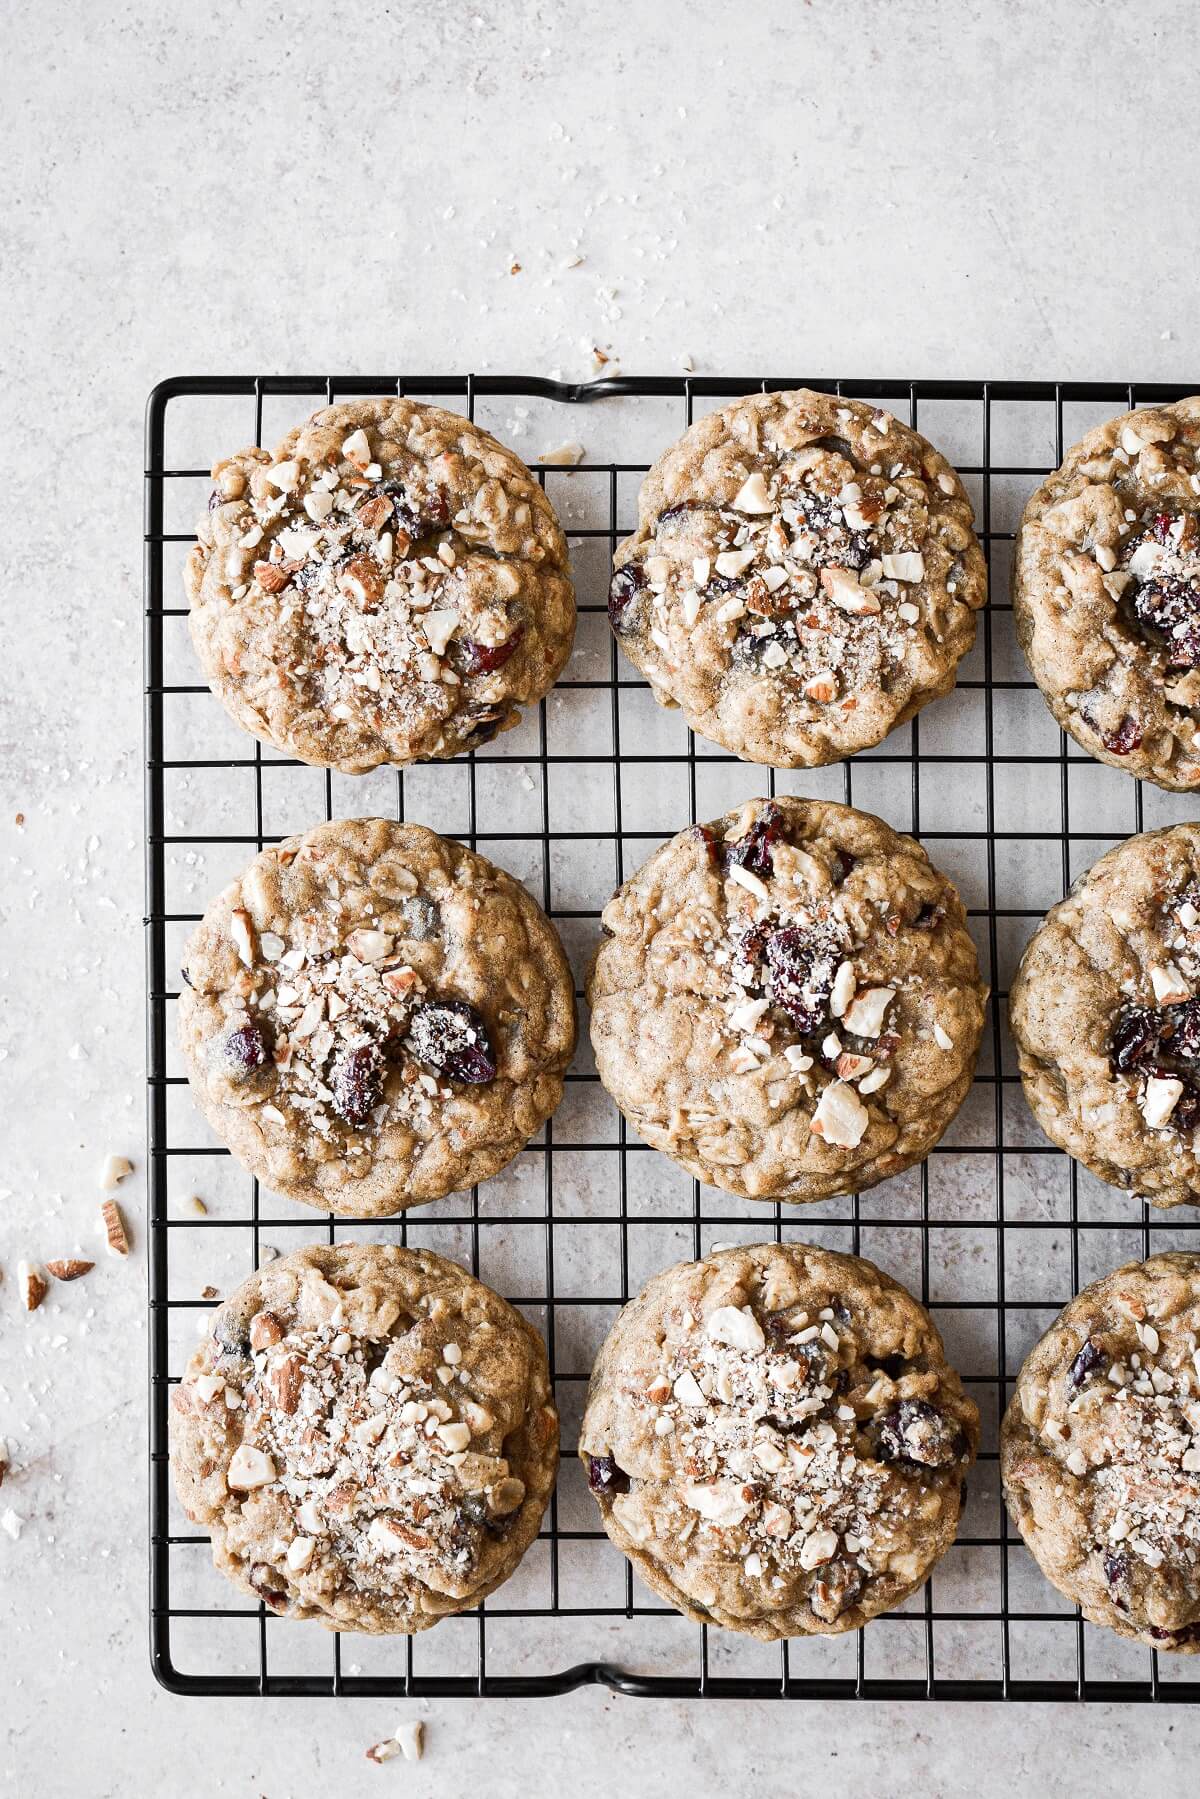 Cranberry almond oatmeal cookies on a cooling rack.